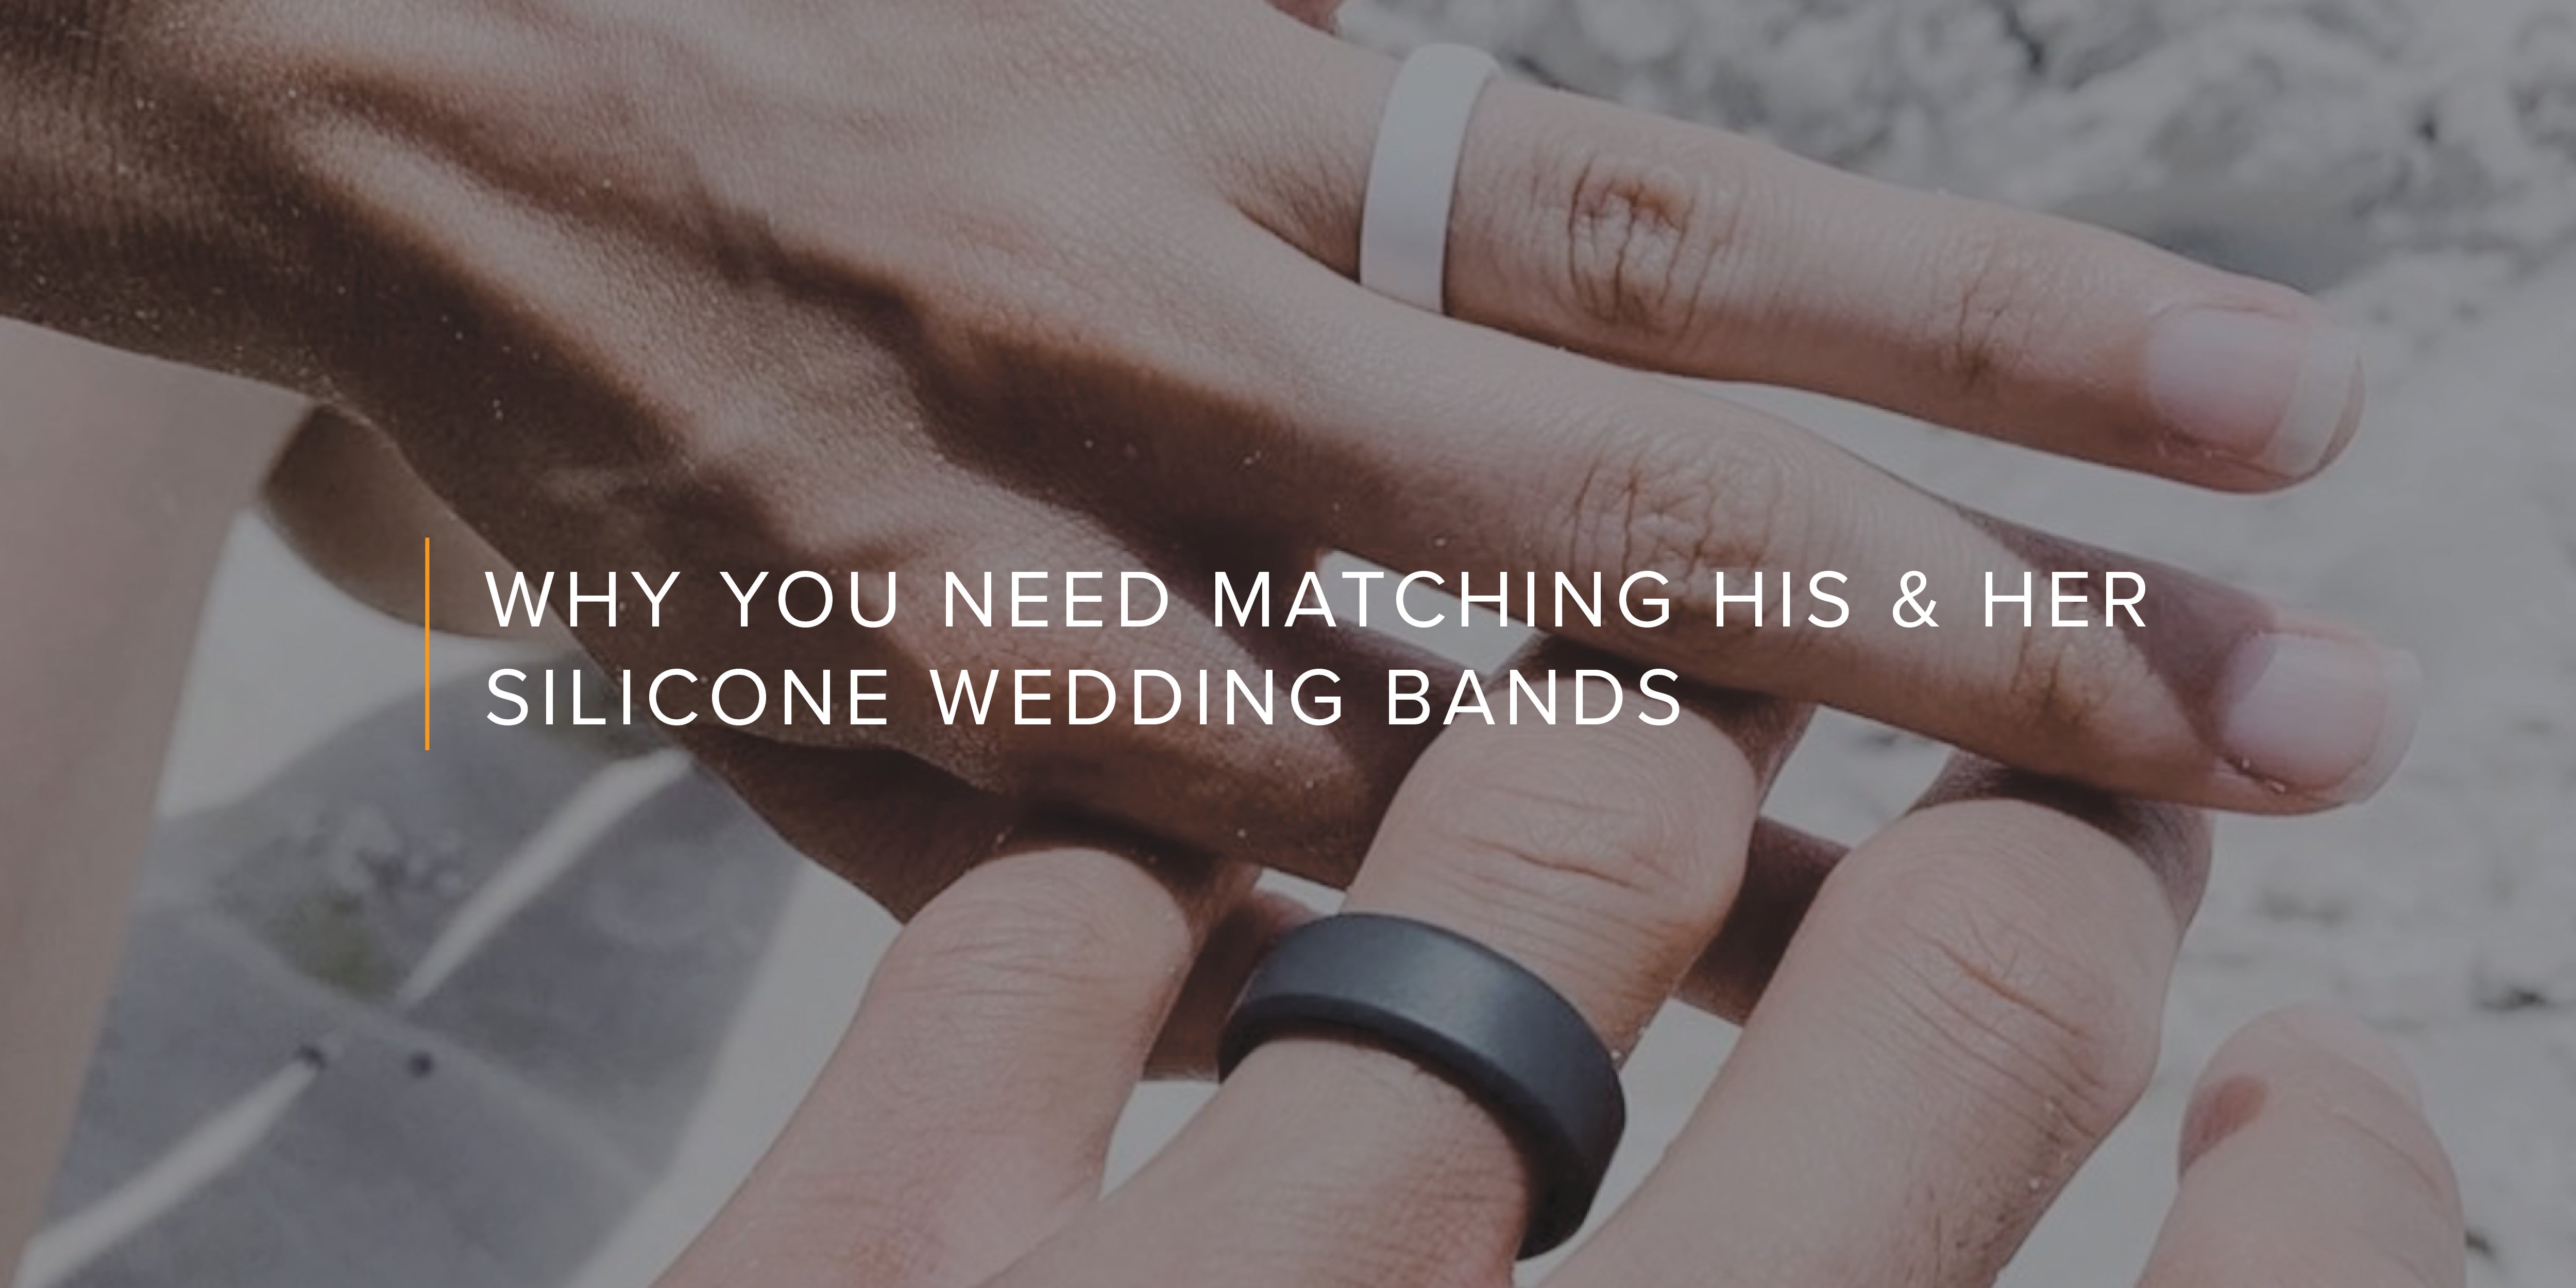 Love Is in the Air: Why You Need a Silicone Wedding Band